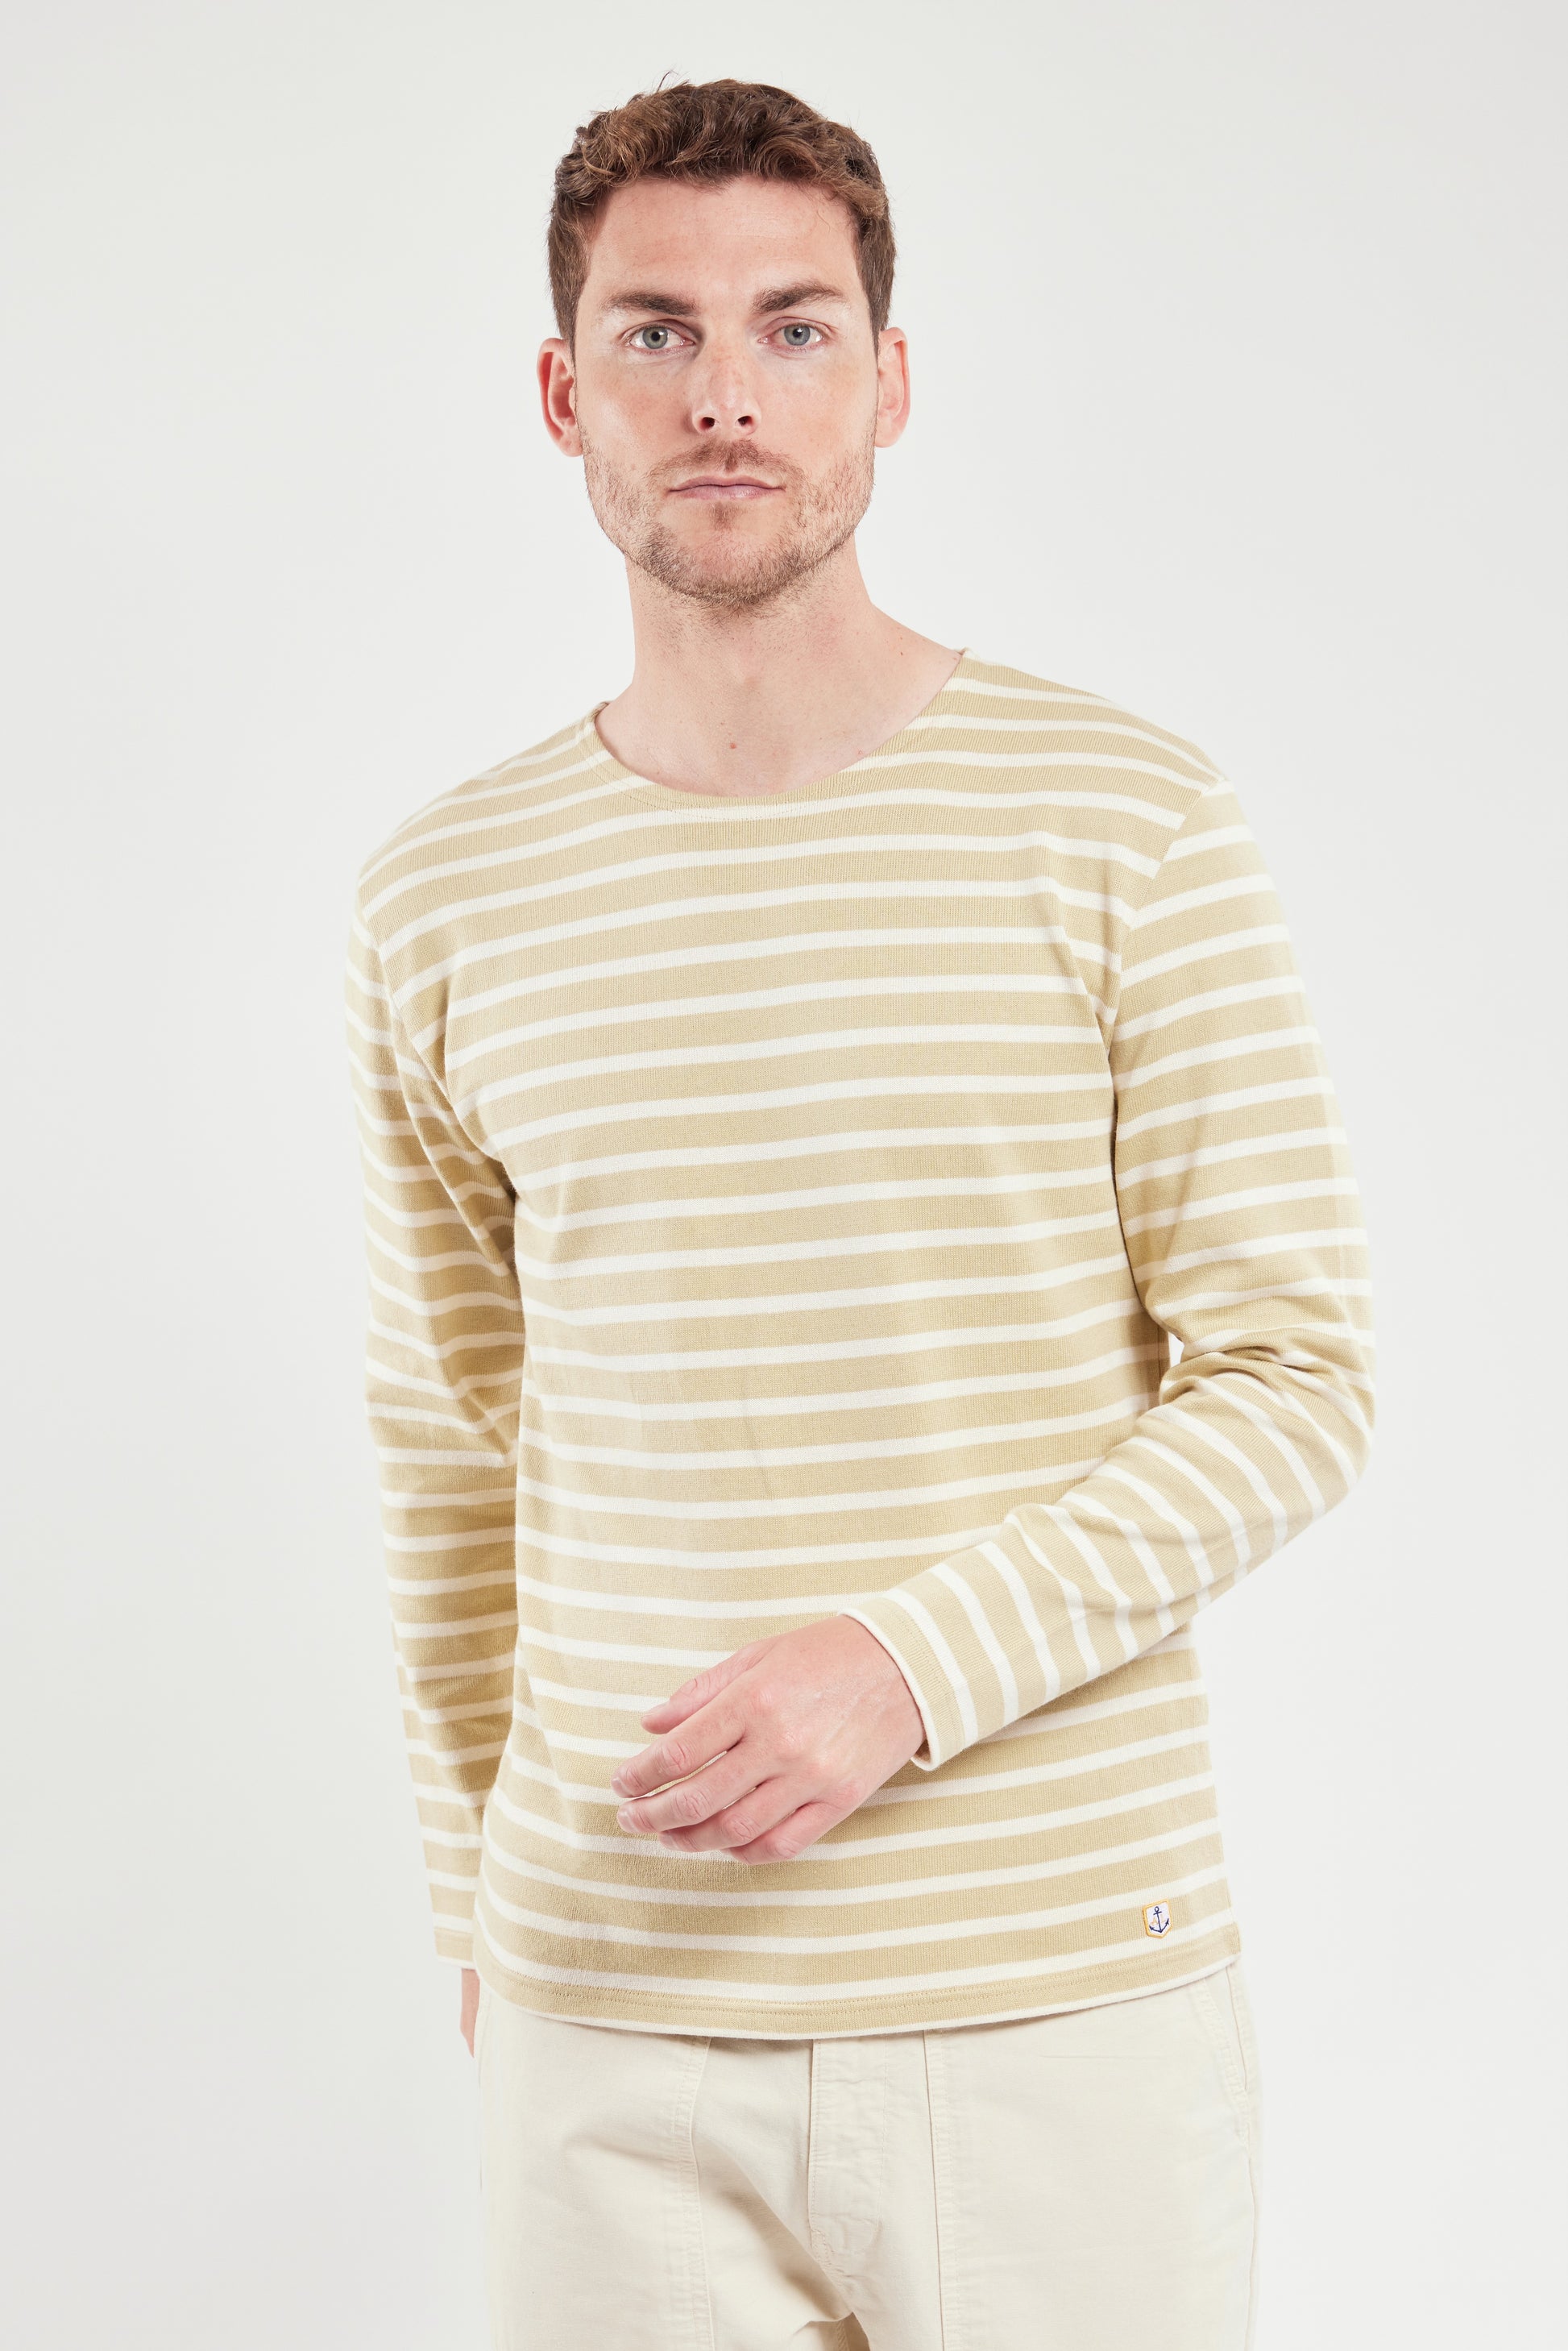 Armor Lux Breton Long Sleeve T-Shirt in pale olive and nature cream